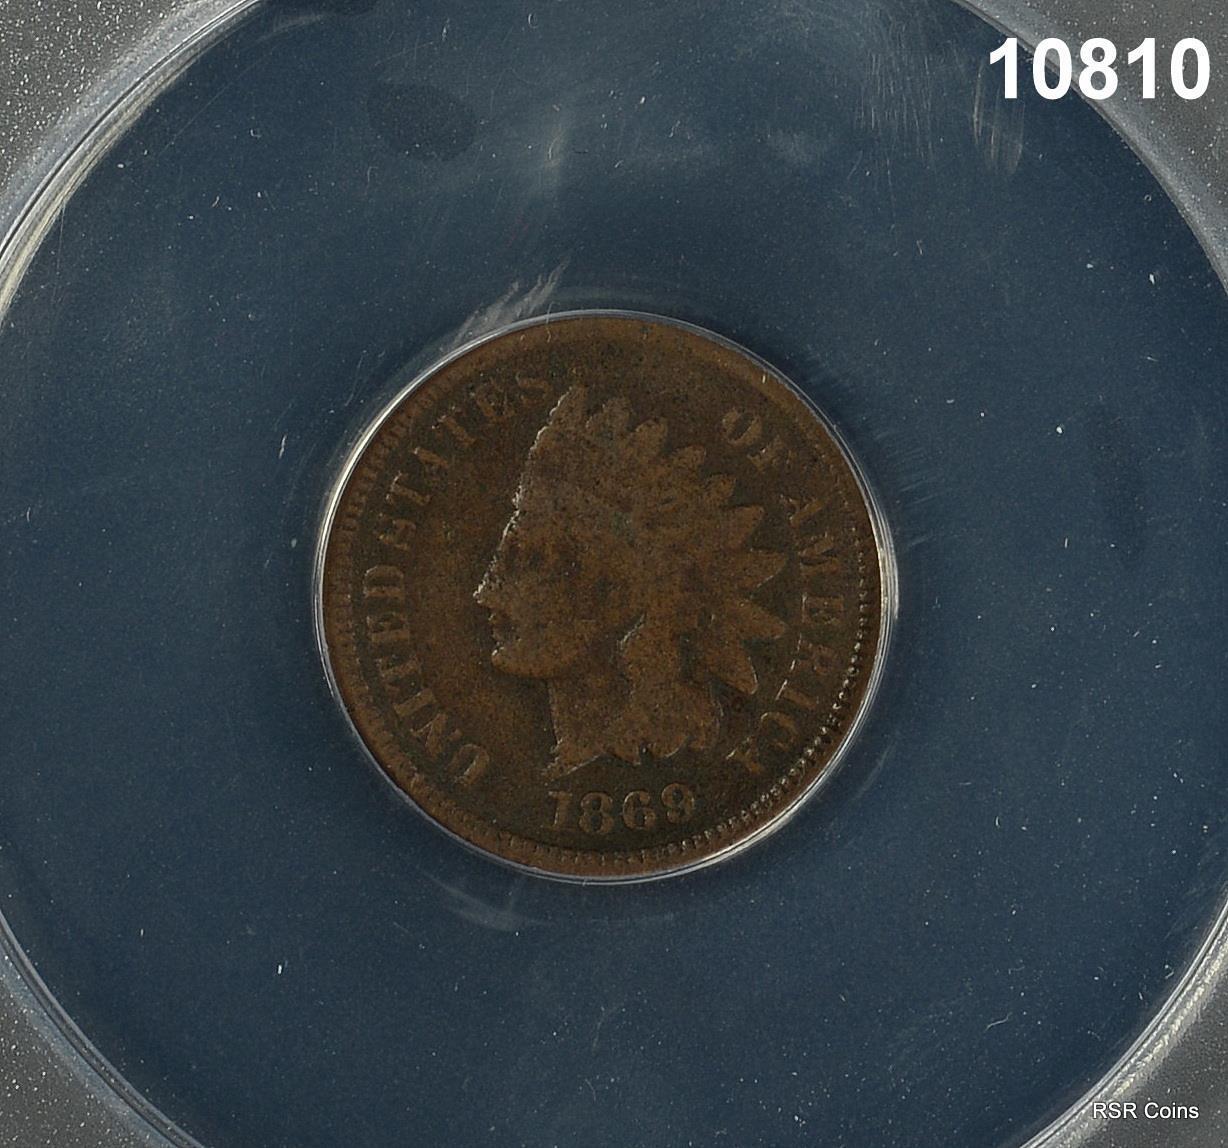 1869 INDIAN HEAD CENT ANACS CERTIFIED GOOD 6 CORRODED SCARCE DATE! #10810